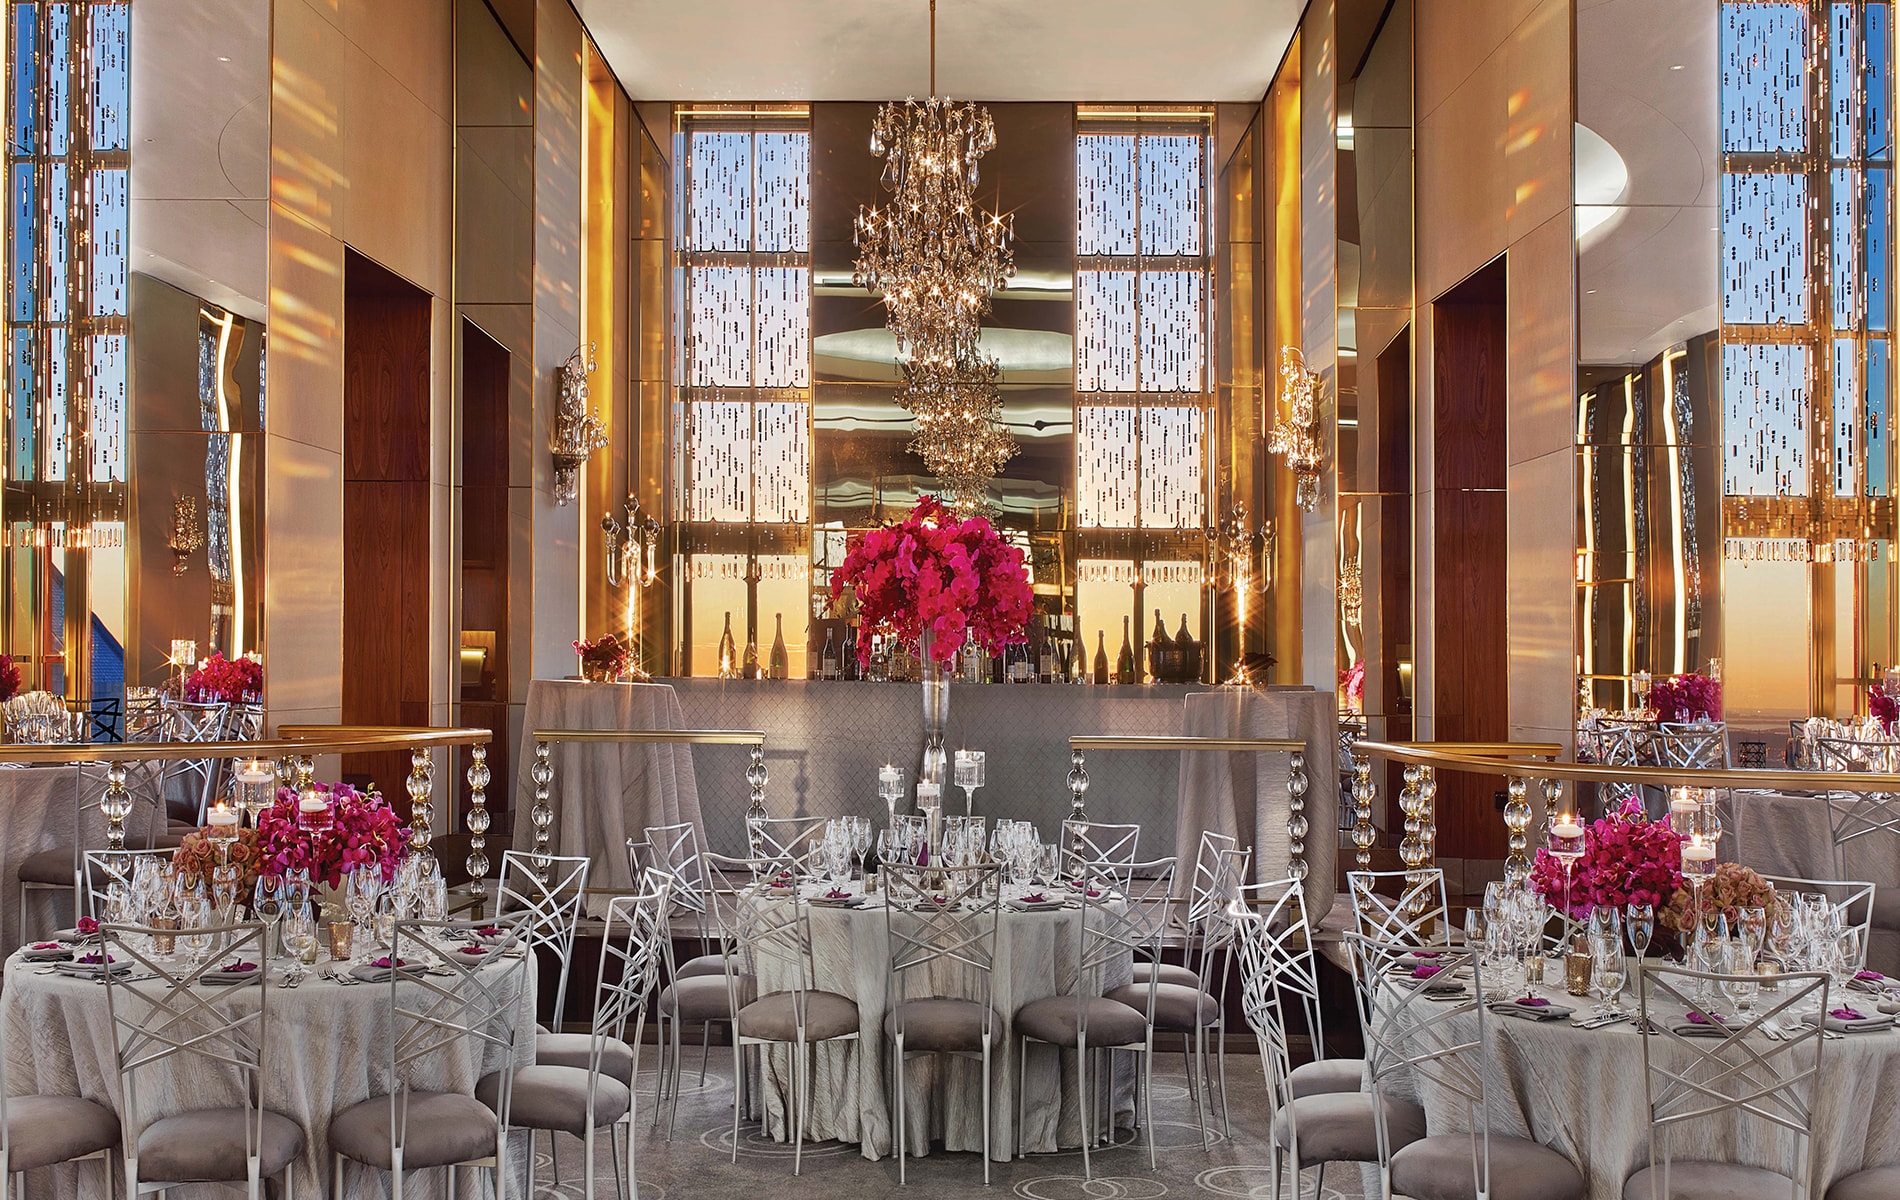 The Rainbow Room on the sixty-fifth floor at Rockefeller Center has been one of New York City’s iconic event venues since 1934 and underwent a massive renovation before reopening in 2014.